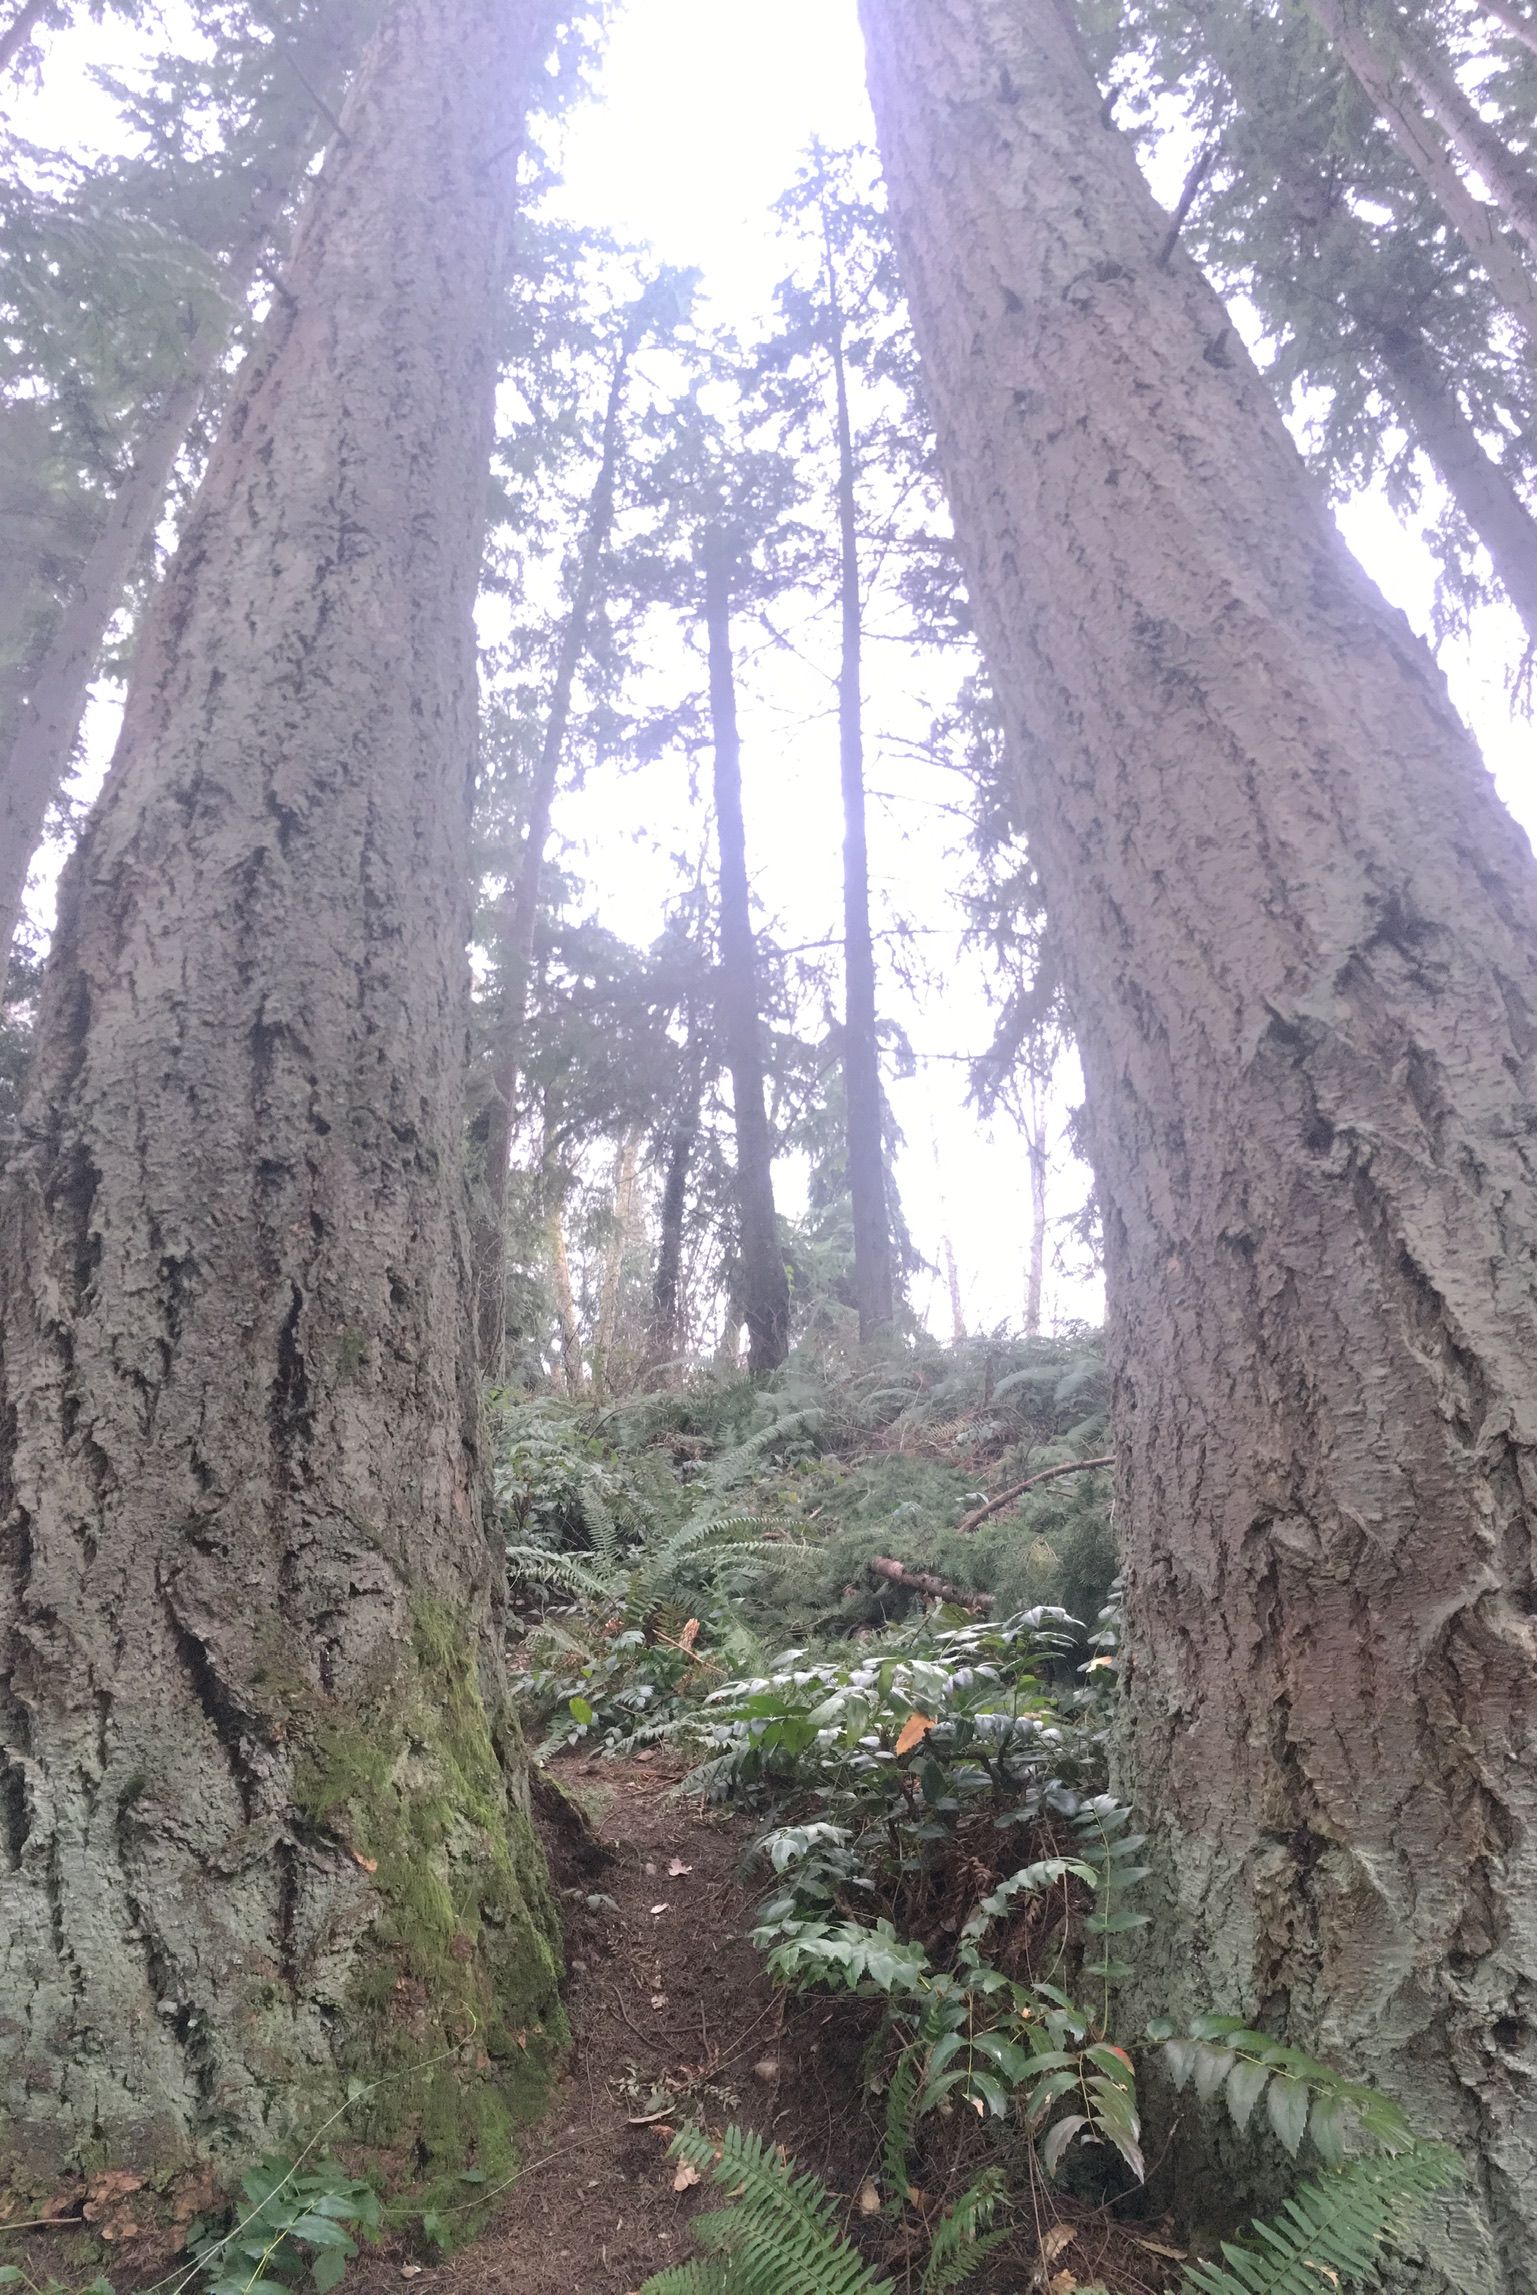 two tall pines with some moss growing at their bases, a small path in between both trees. trees are surrounded on the forest floor by gerns, vines, and other trees.